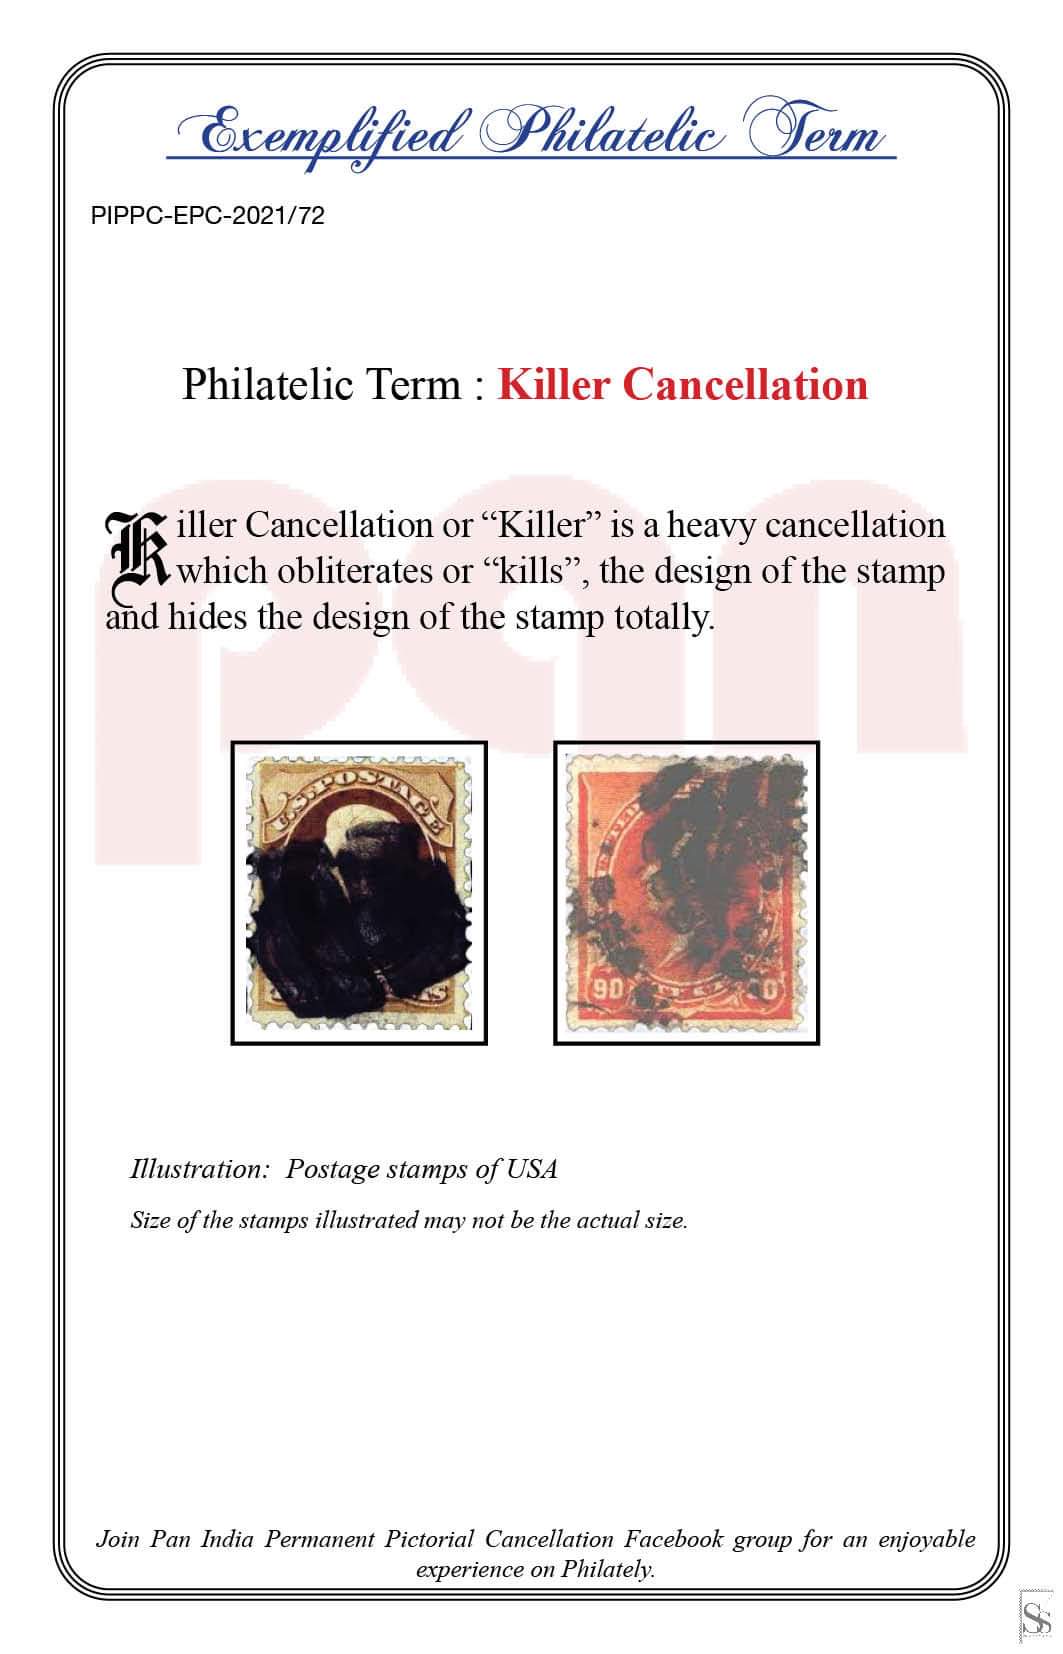 72. Today's Exemplified Philatelic term-Killer Cancellation